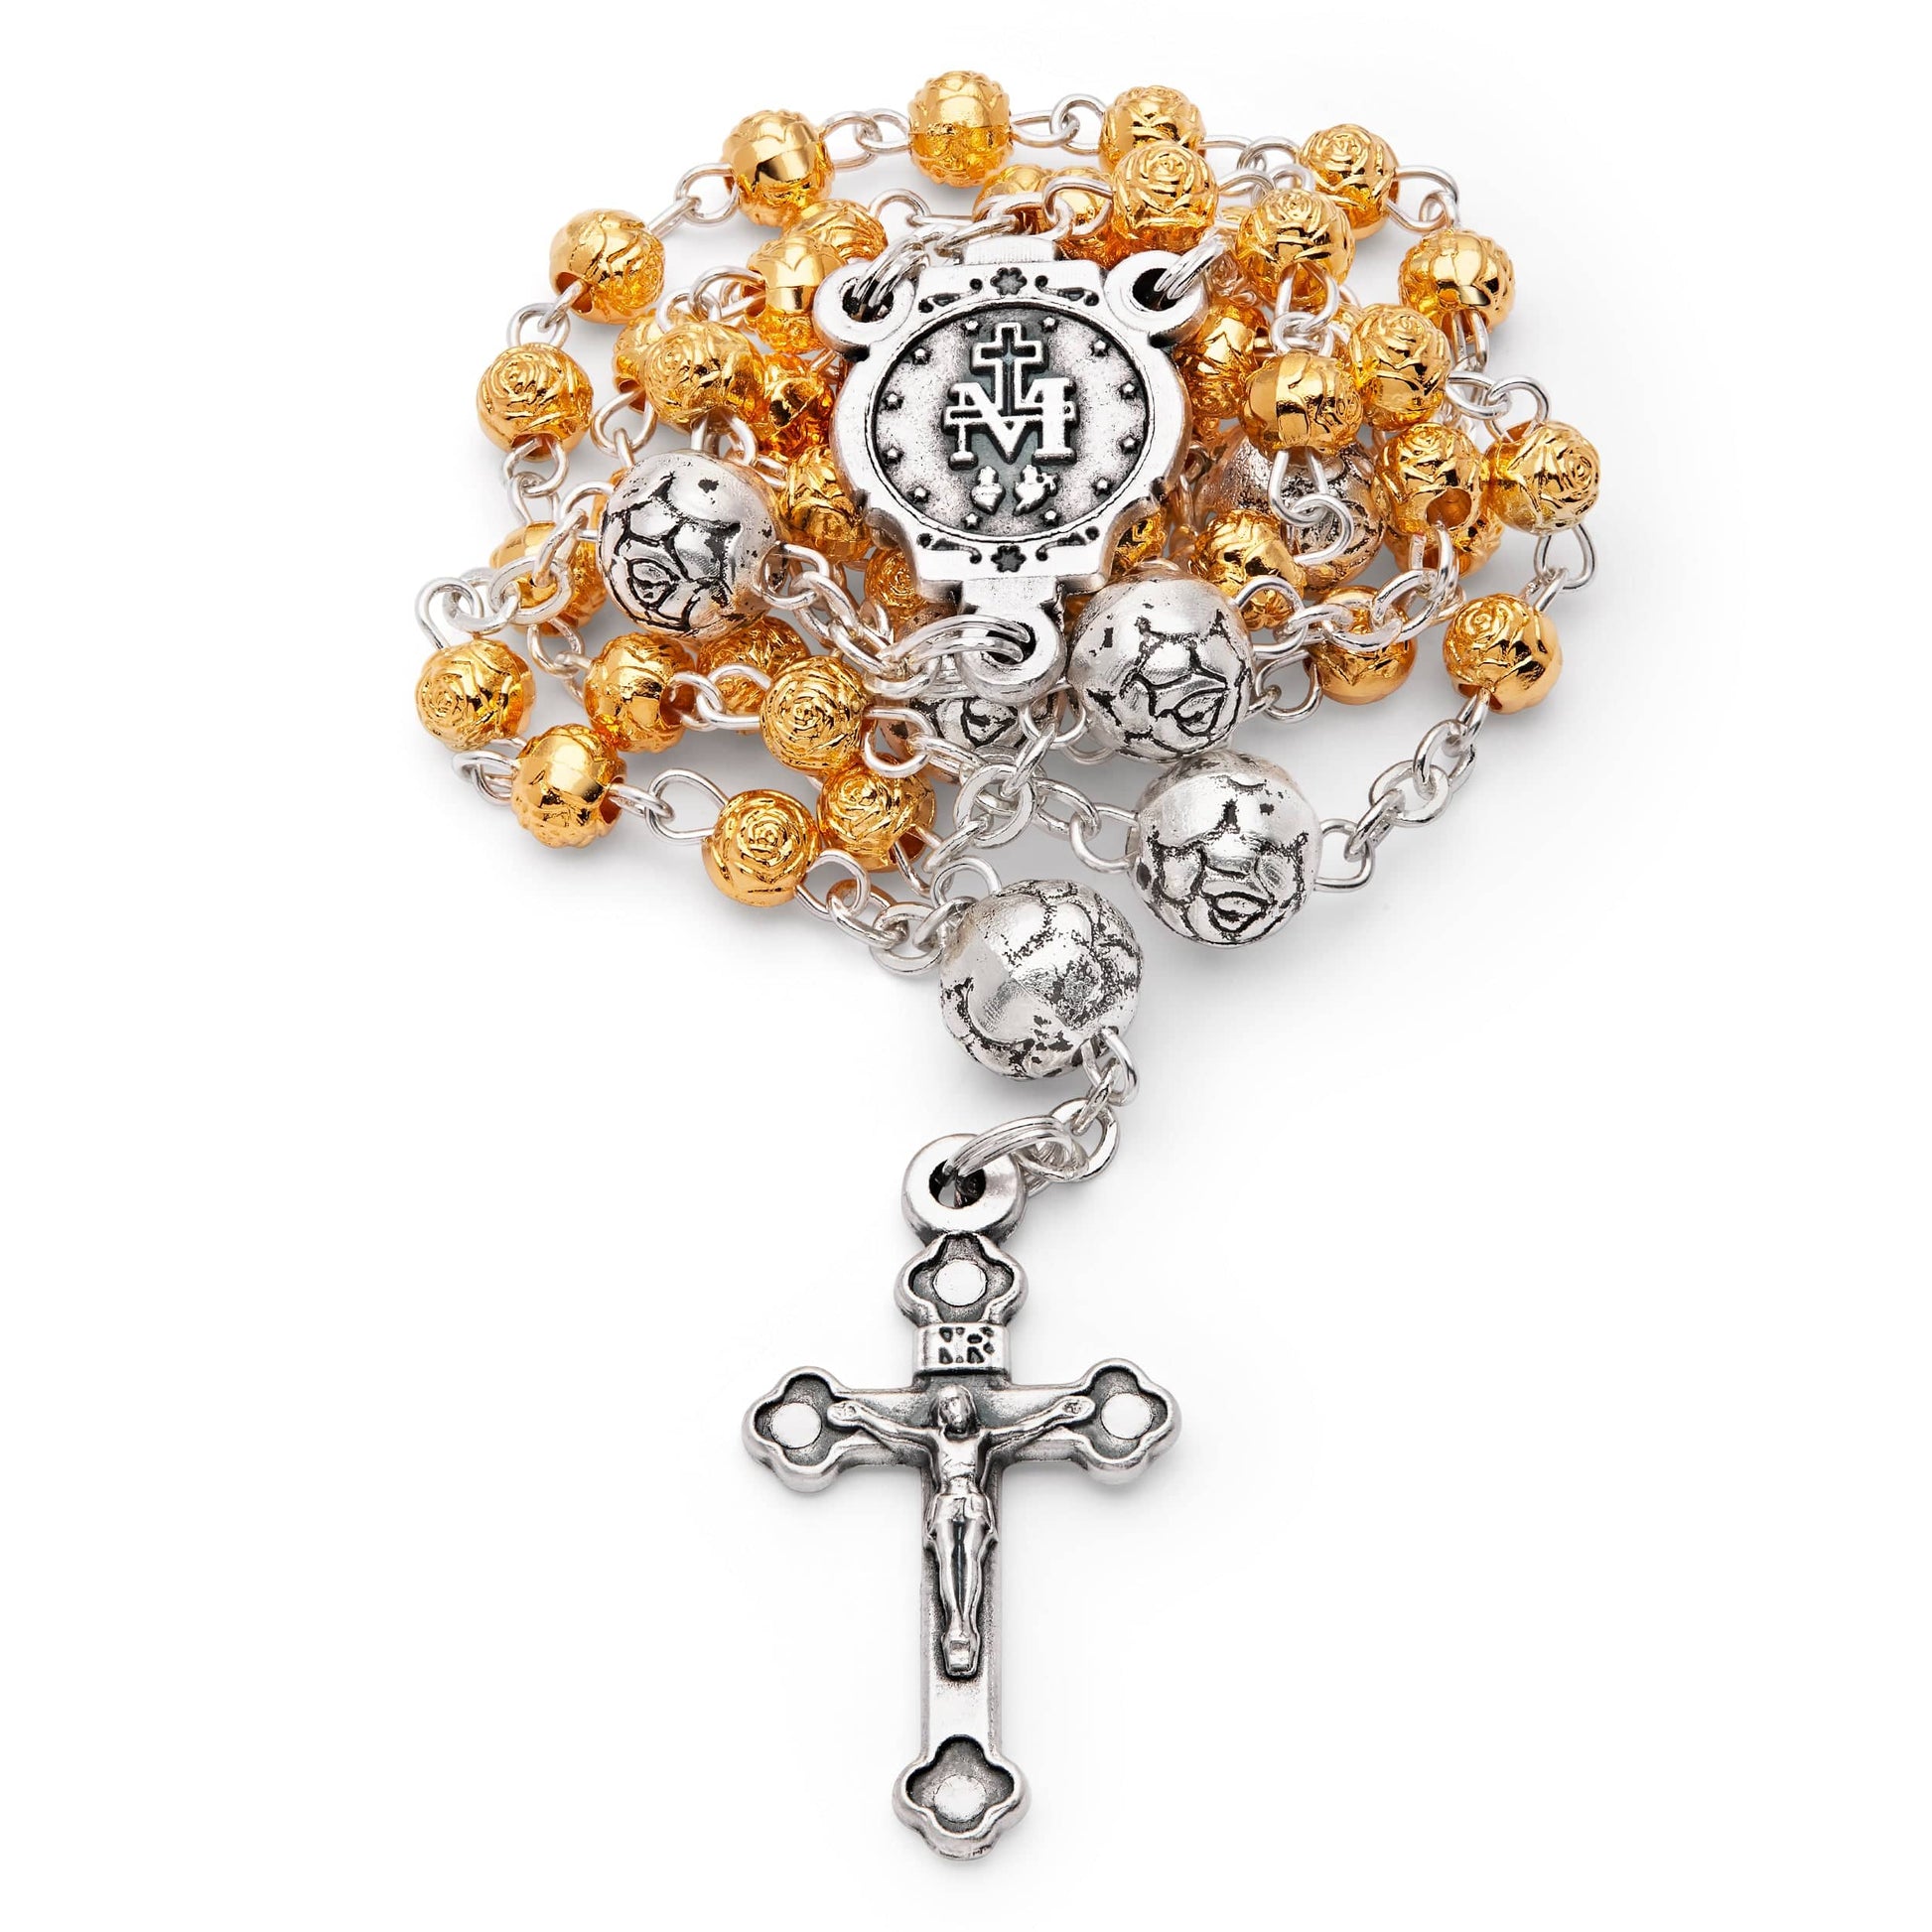 MONDO CATTOLICO Prayer Beads 32 cm (12.6 in) / 4 mm (0.15 in) Our Lady of the Miraculous Medal Keepsake Case and Rosary